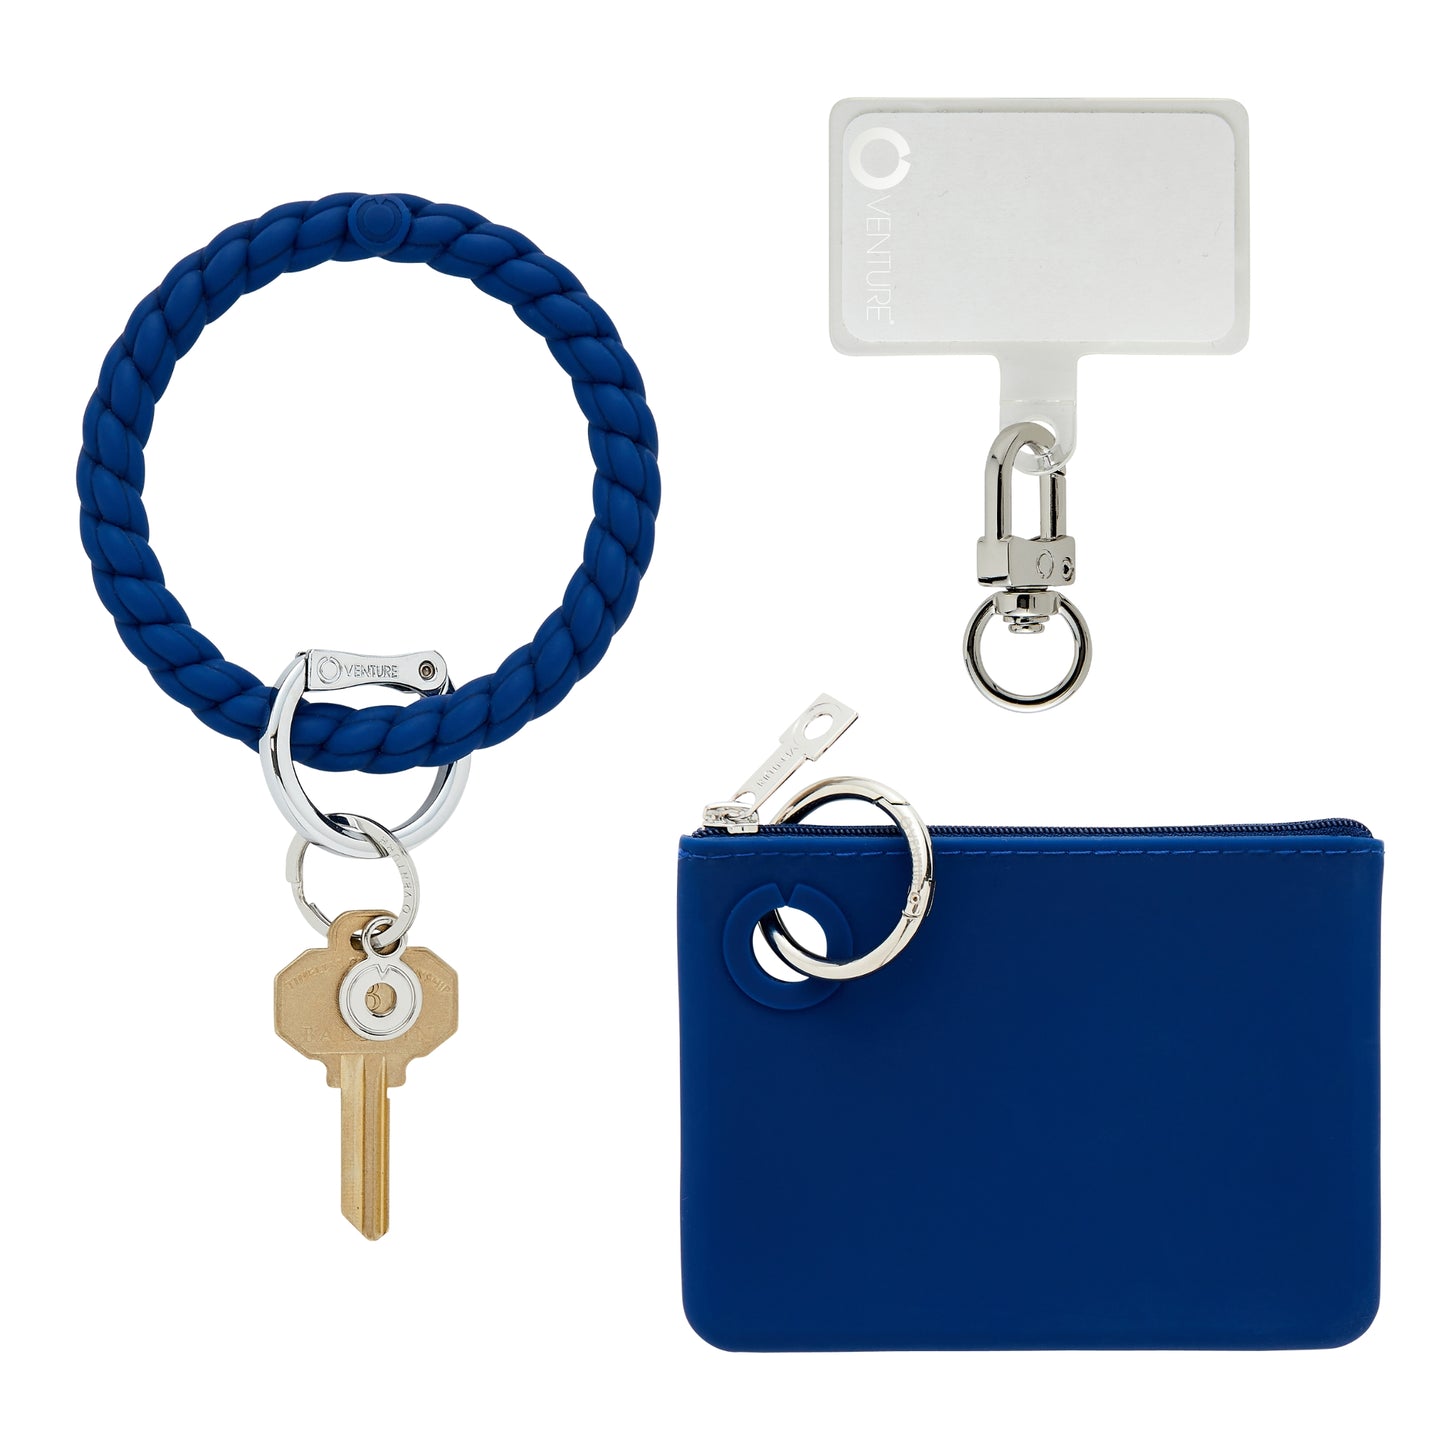 Navy braided silicone set with a Big O Keyring, pouch and hook me up phone connector